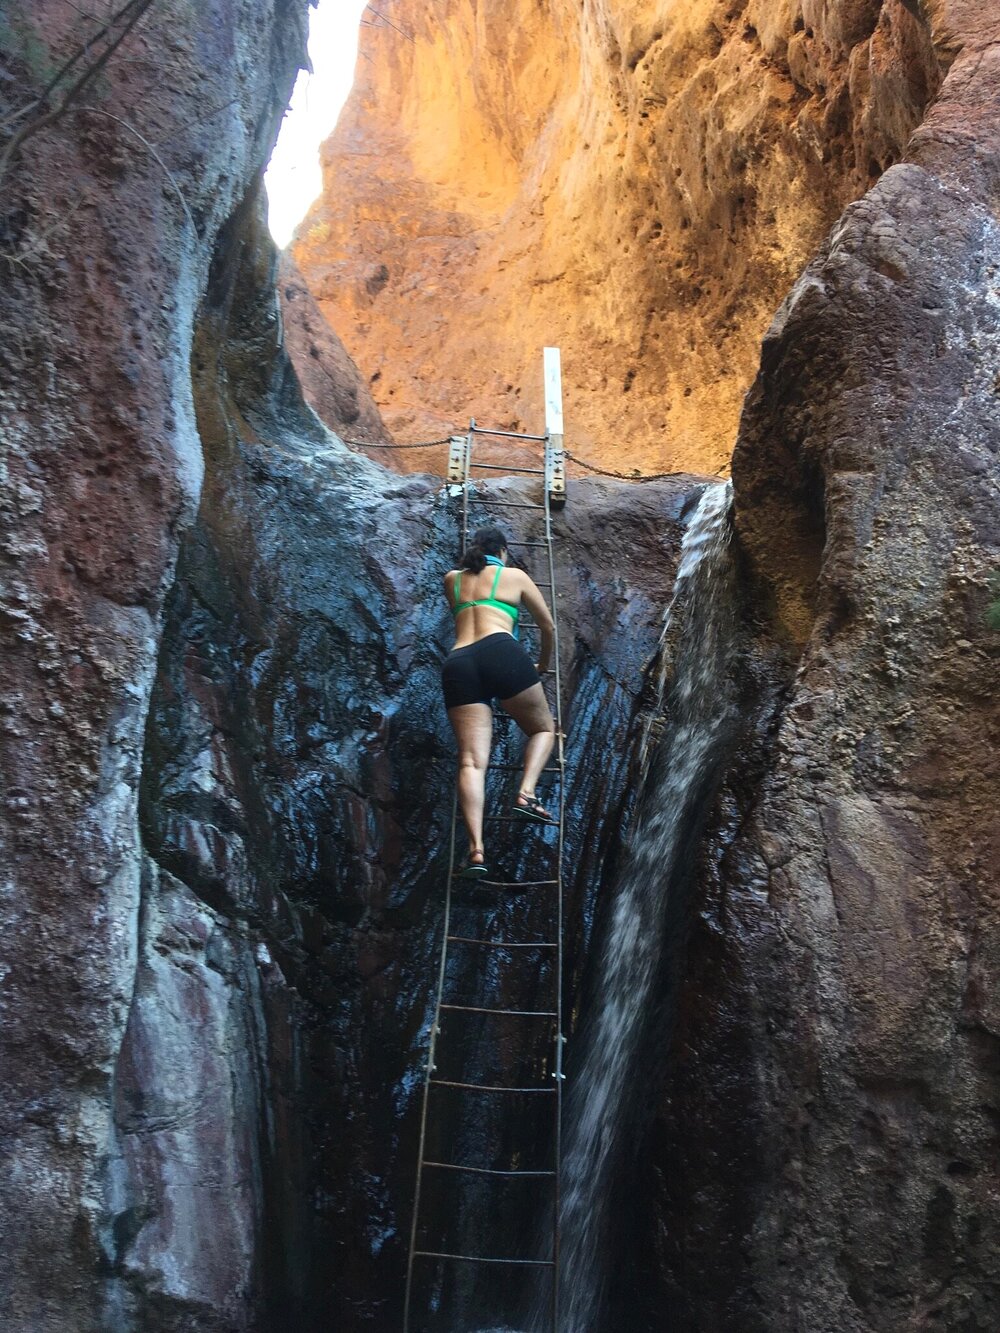  when you encounter the tall metal ladder ascending to to the stars you have made it to the Arizona Hot Springs! This ladder is bolted to the rocks and quite sturdy, however it can be slippery from the springs’ water flow, so be sure to wear those wa